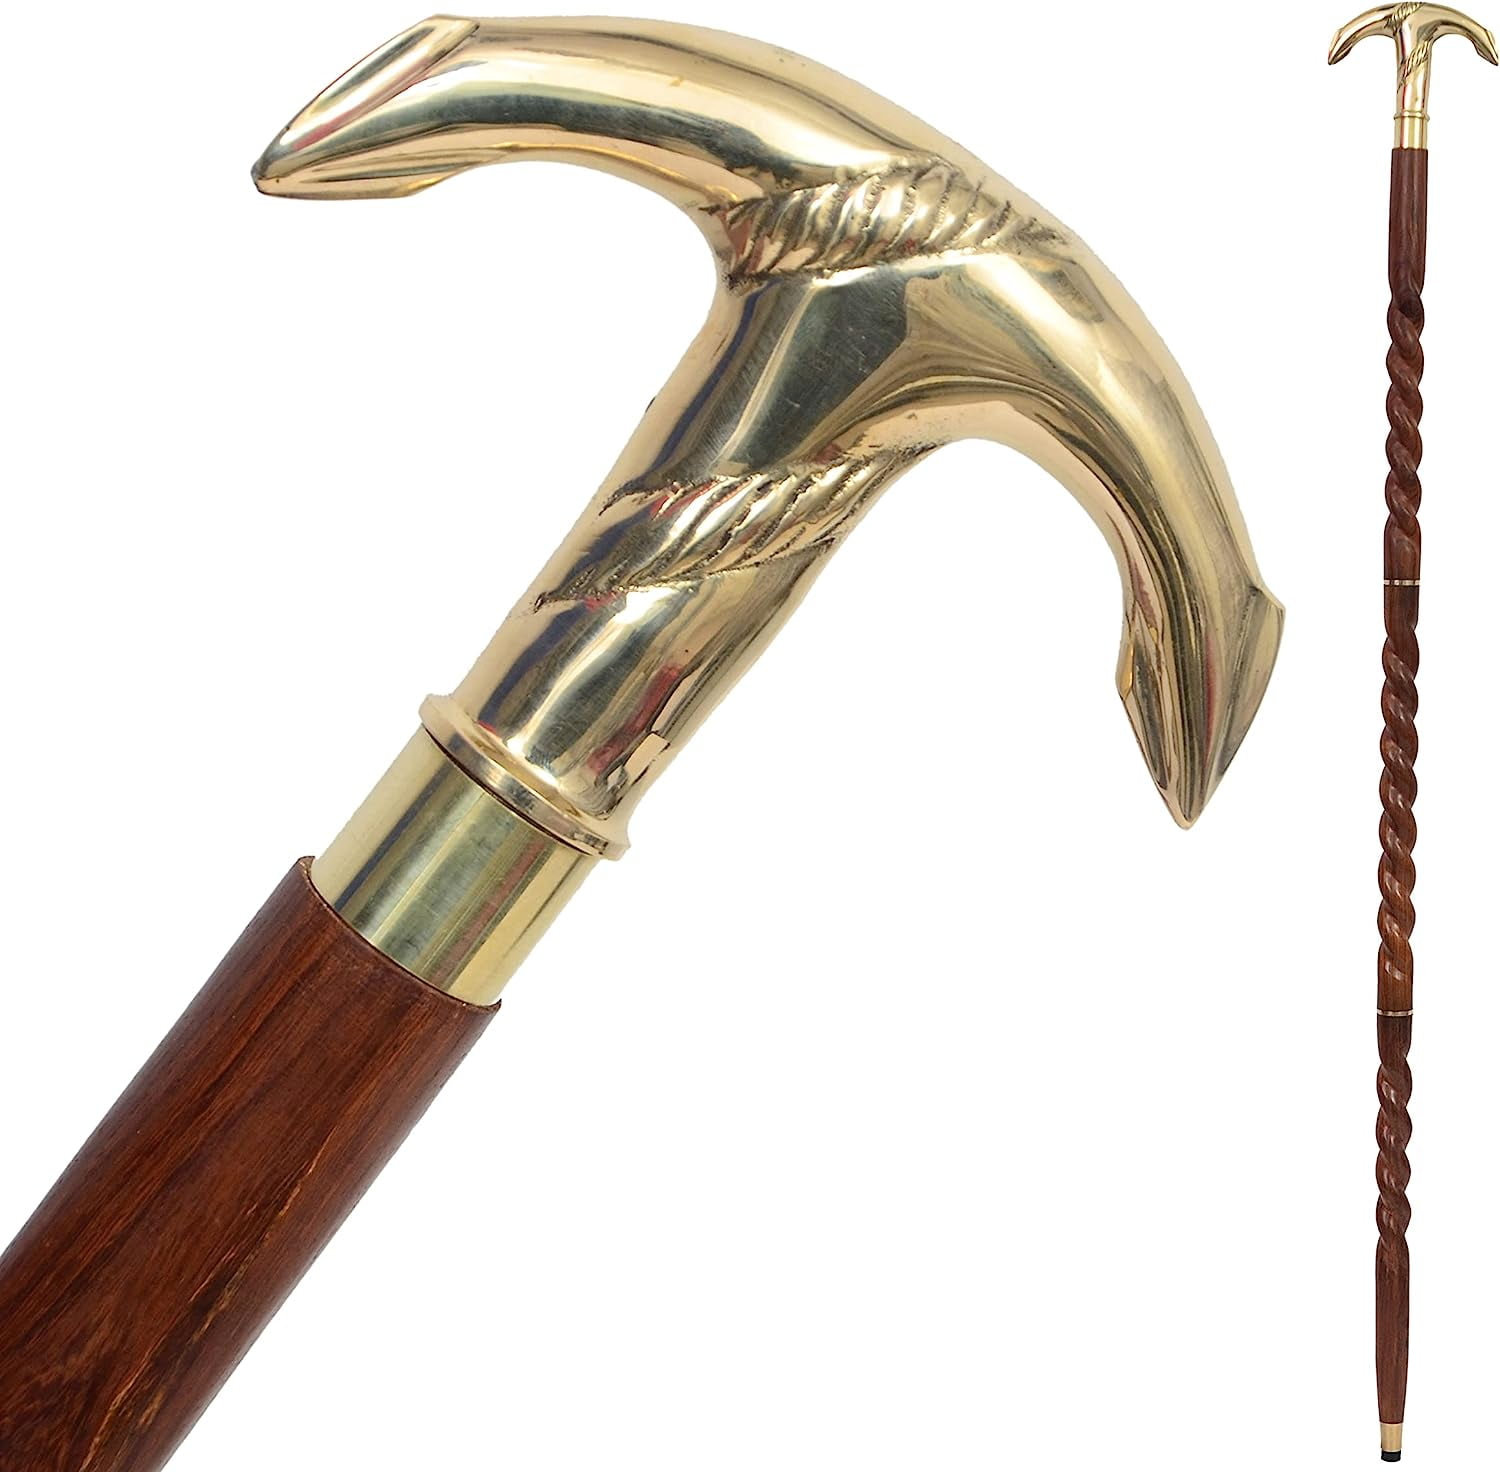 Brazos Free Form Natural Hardwood Root Handcrafted Walking Cane, 37 